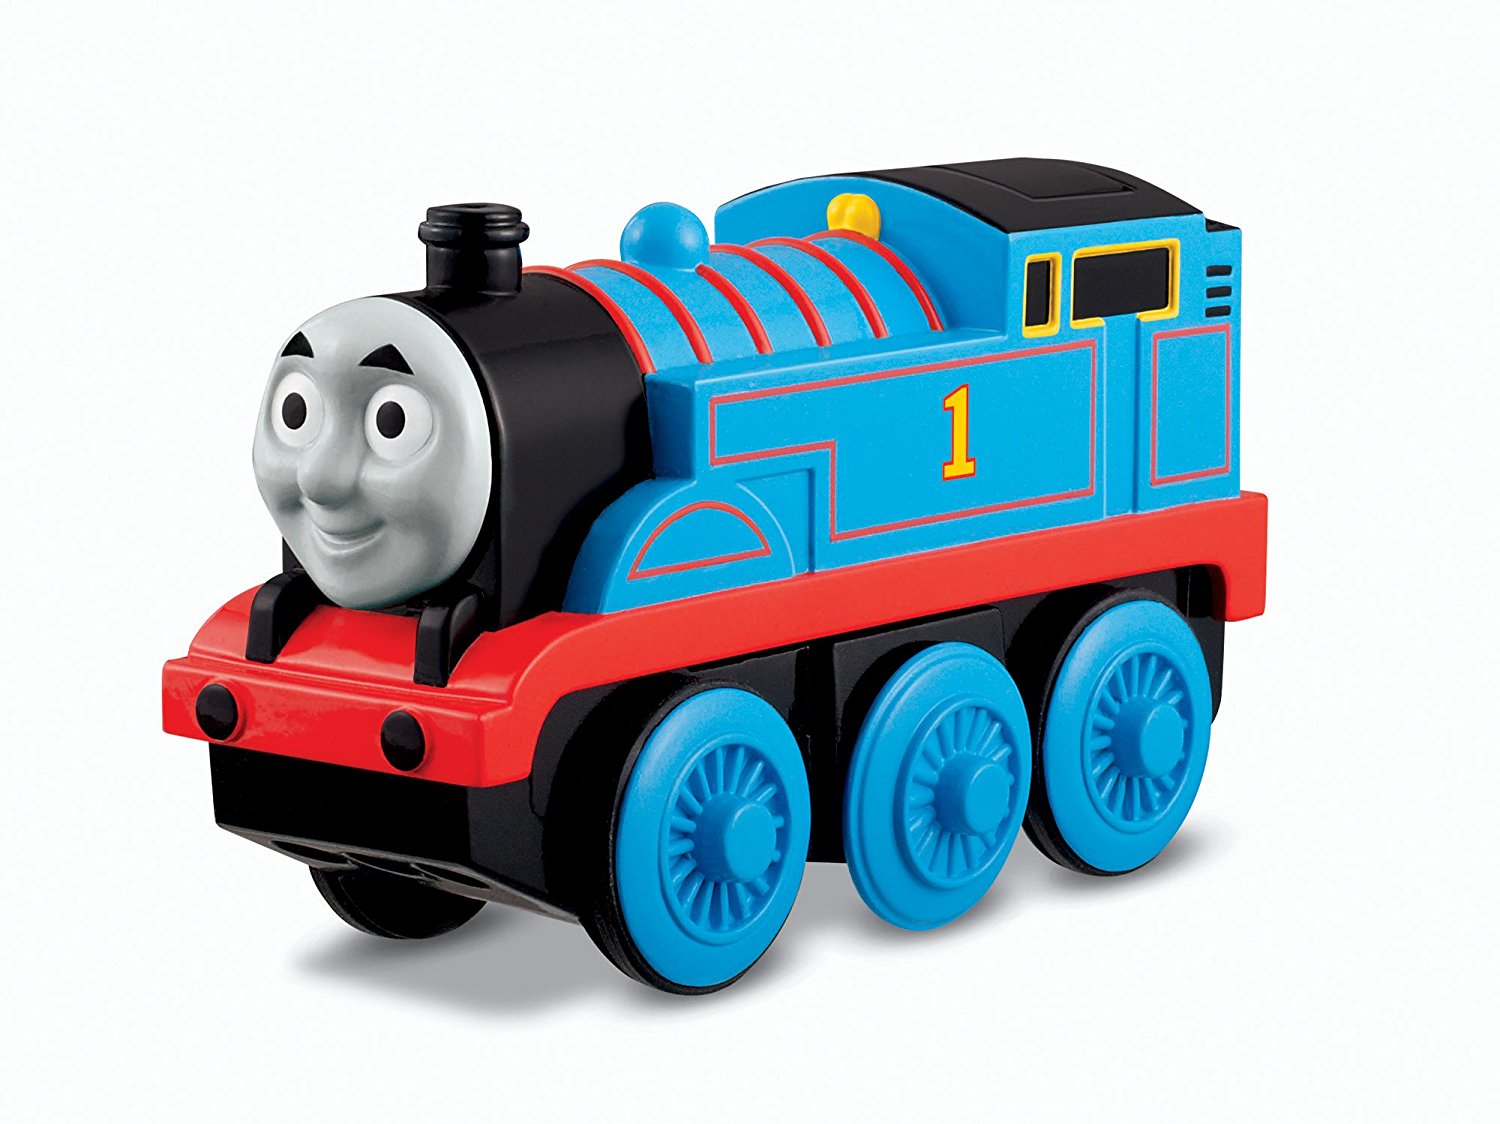 Fisher Price Thomas & Friends Wooden Railway Train, Thomas - Battery Operated Train Y4110